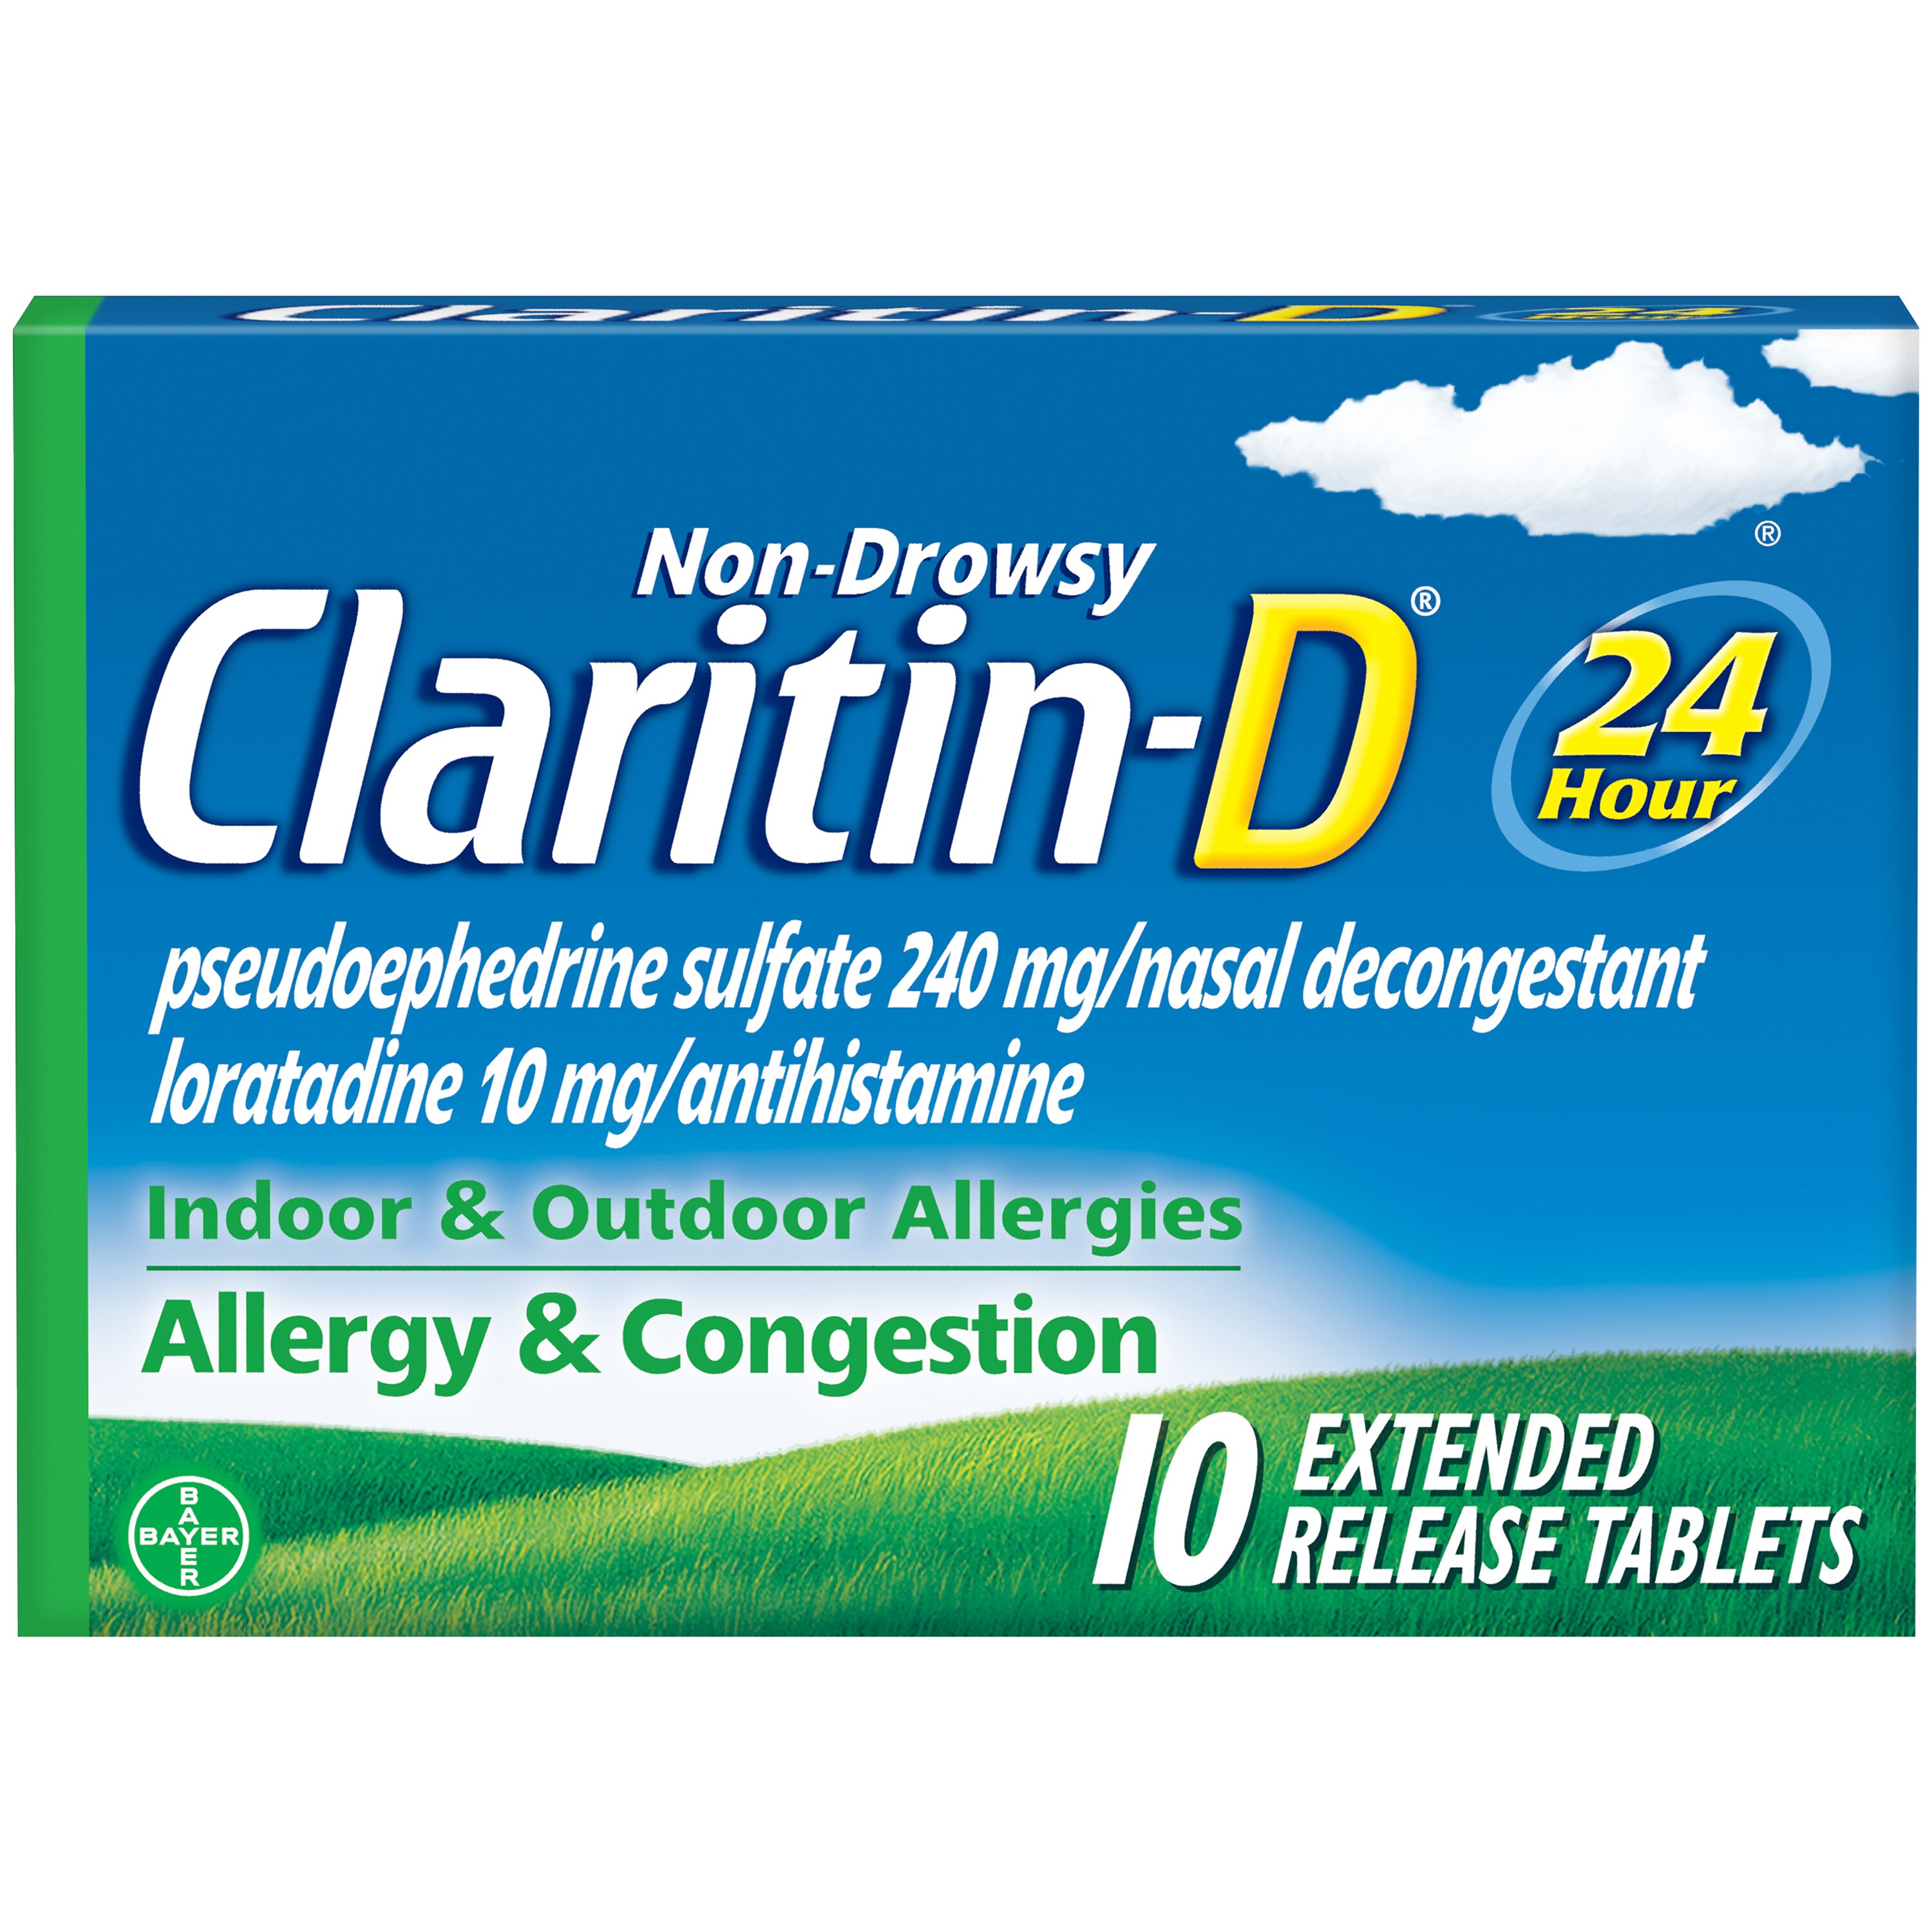 Claritin-D 24 Hour Non-Drowsy Allergy Medicine Extended Release Tablets, Powerful Relief, Nasal Congestion & Sinus Pressure Relief, Indoor And Outdoor